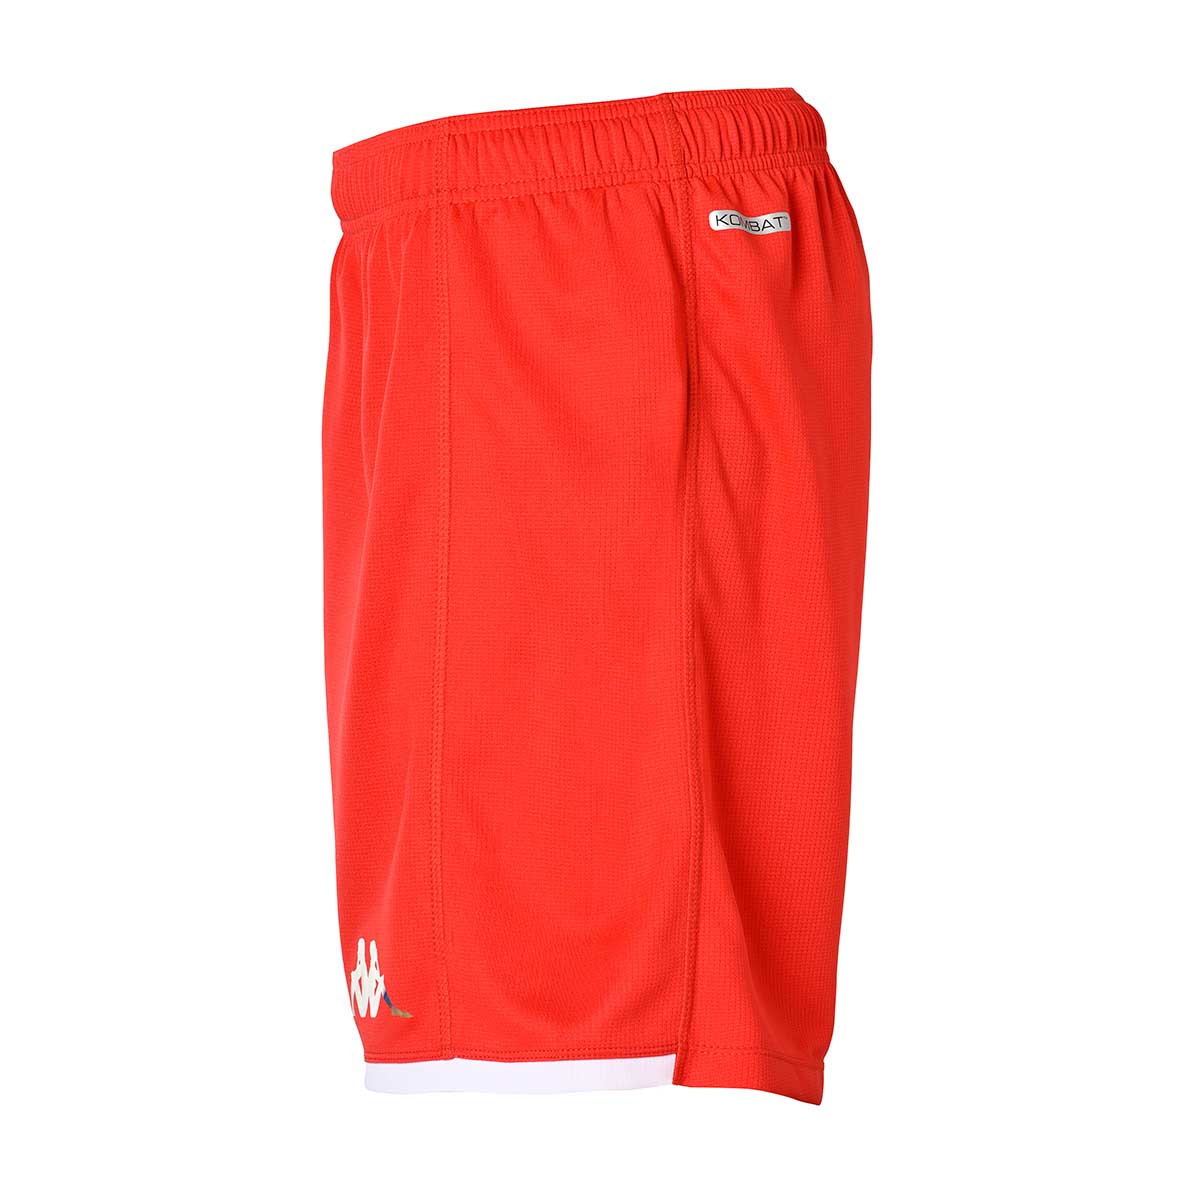 Short Replica Home Tunisie 23/24 Rouge Homme